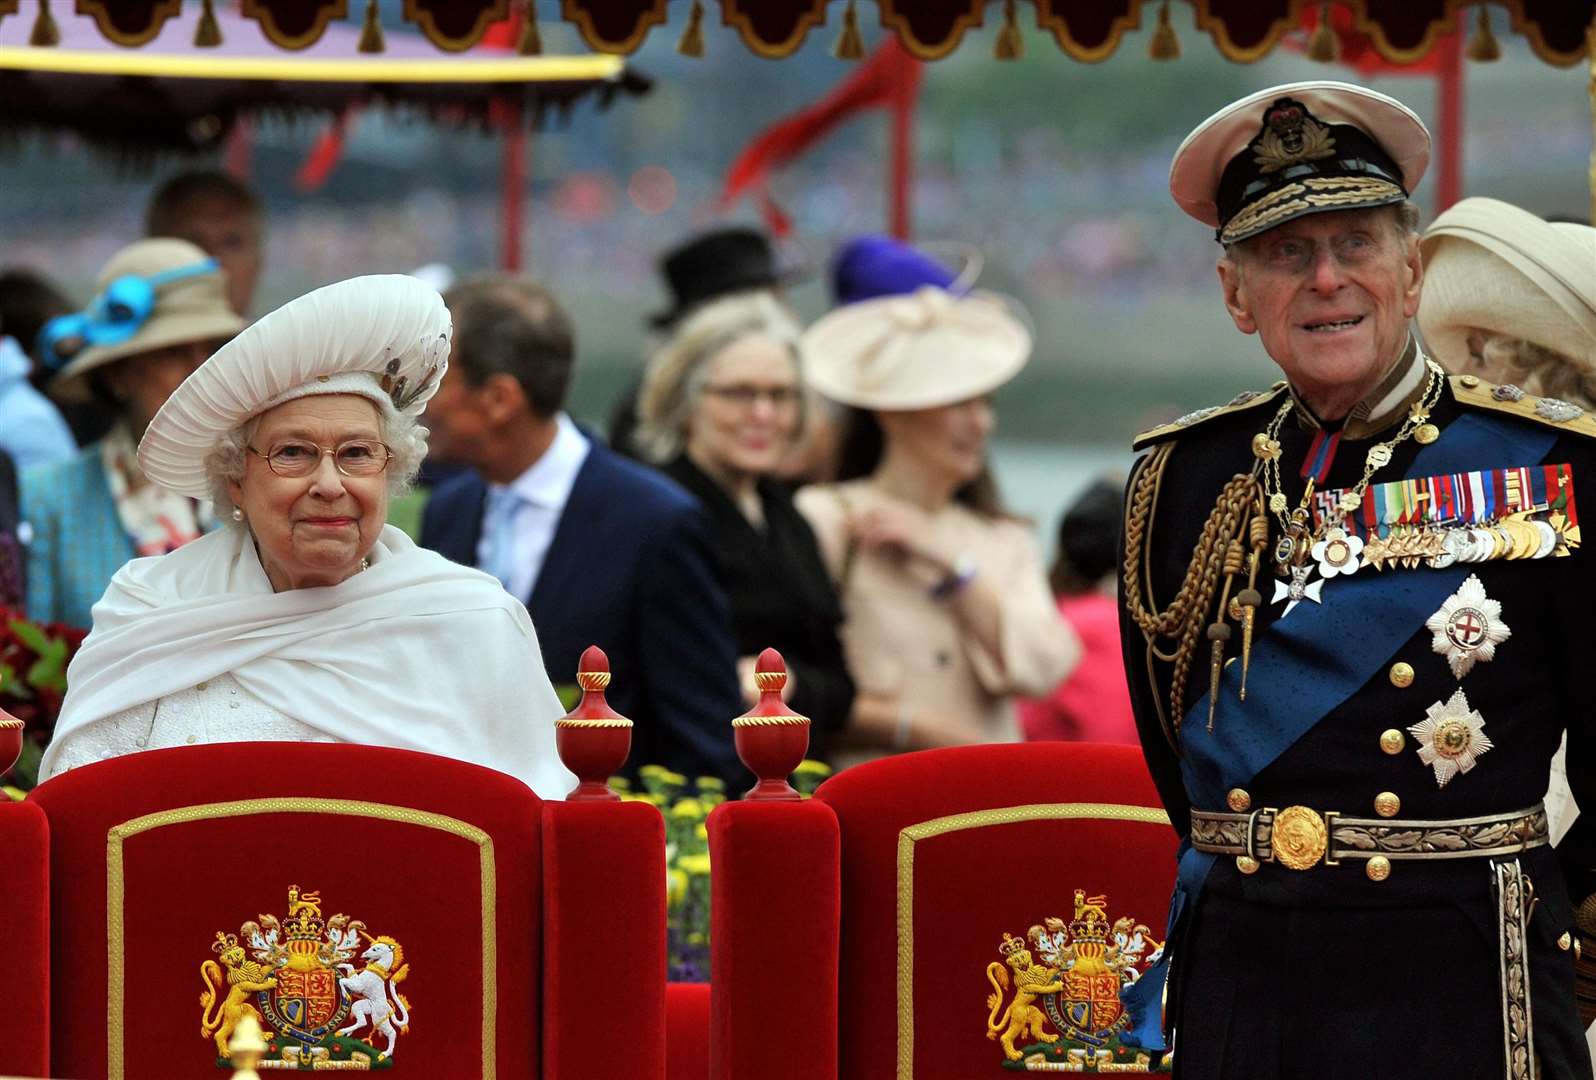 The Queen and the Duke of Edinburgh onboard the Spirit of Chartwell during the Diamond Jubilee Pageant on the River Thames (John Stillwell/PA)